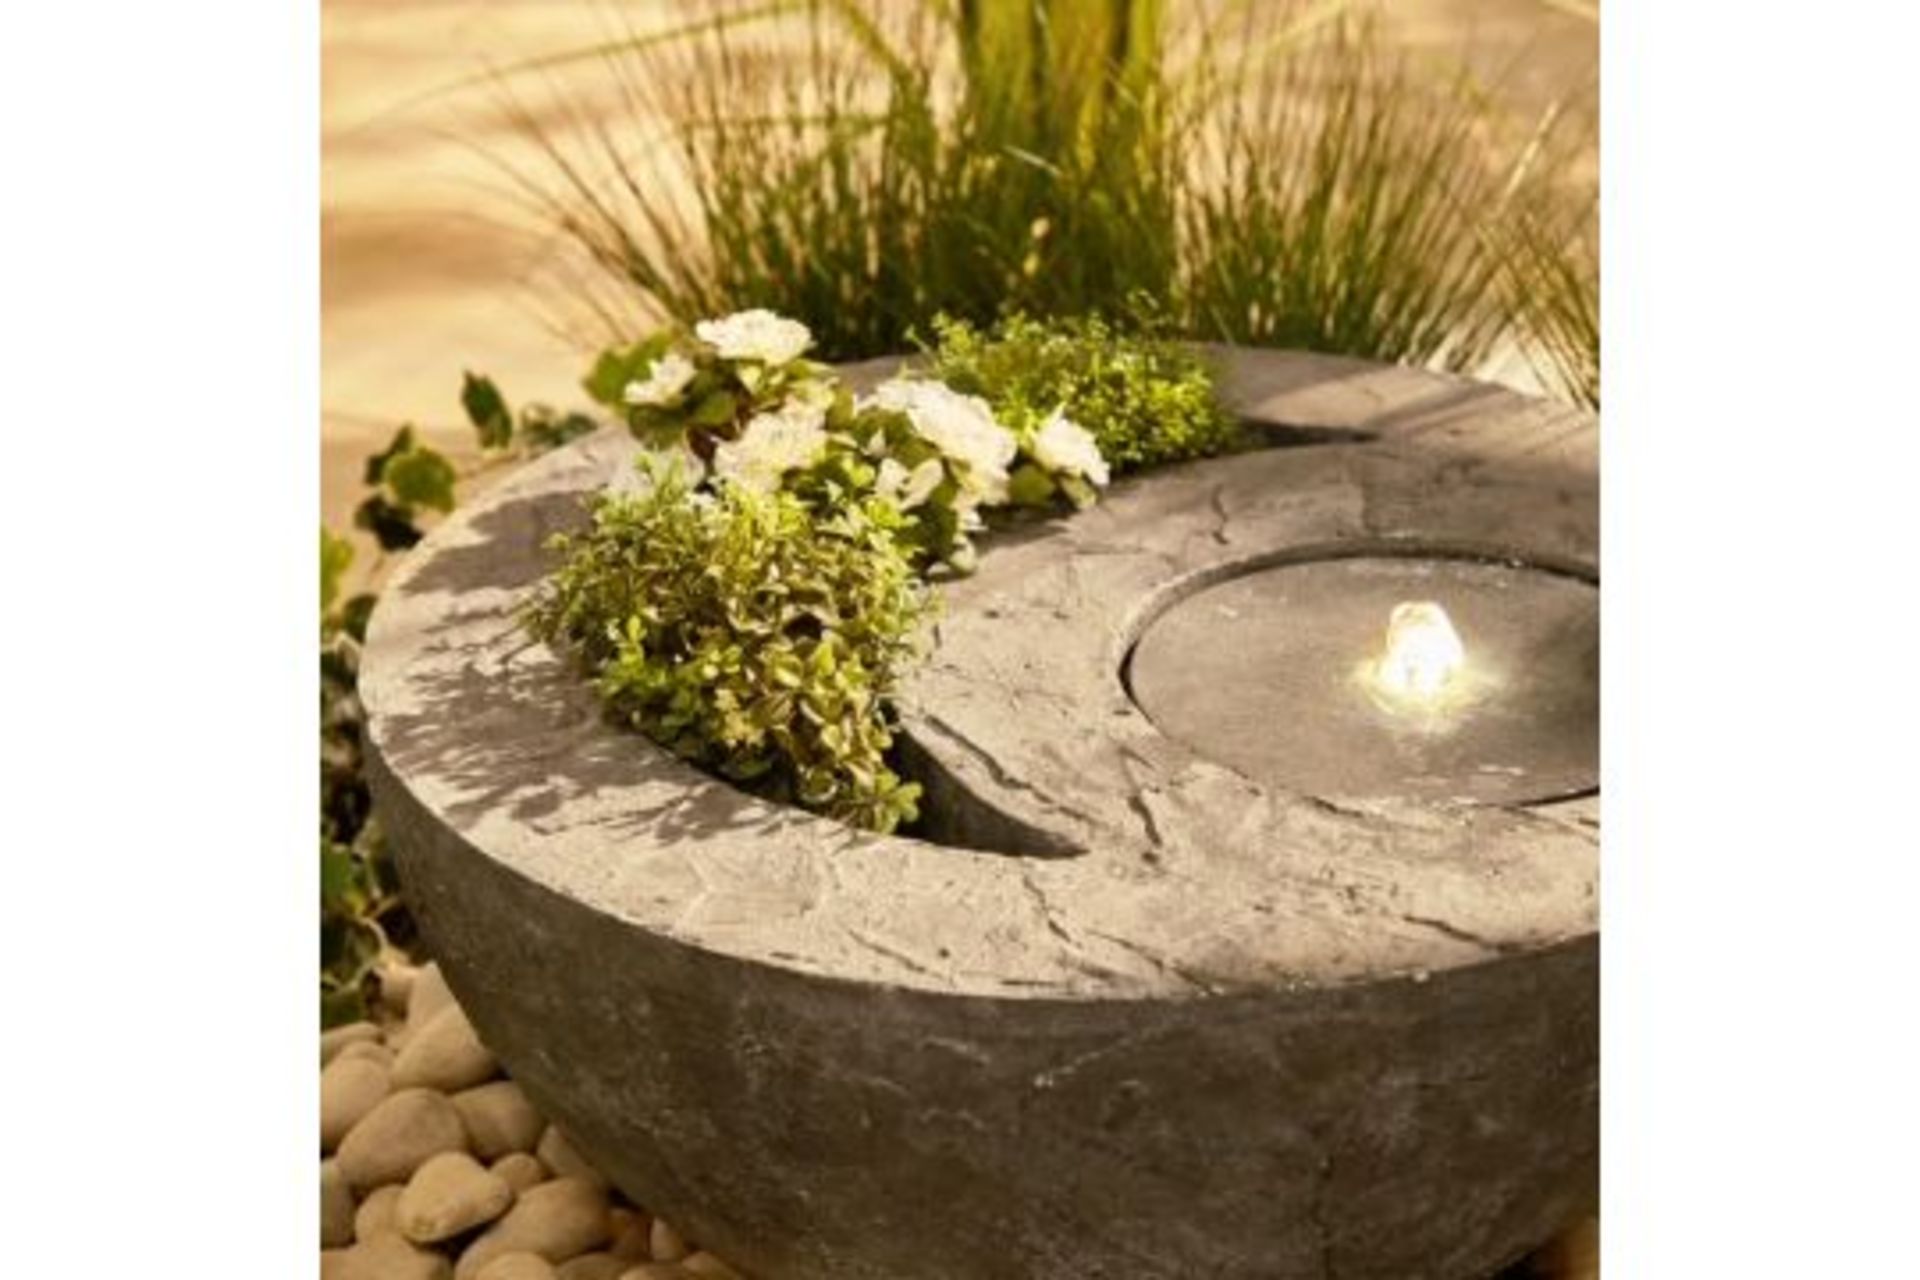 New & Boxed Dual Water Feature and Planter. RRP £299.99 (REF726) - Garden Bowl Design Planter, - Image 5 of 5